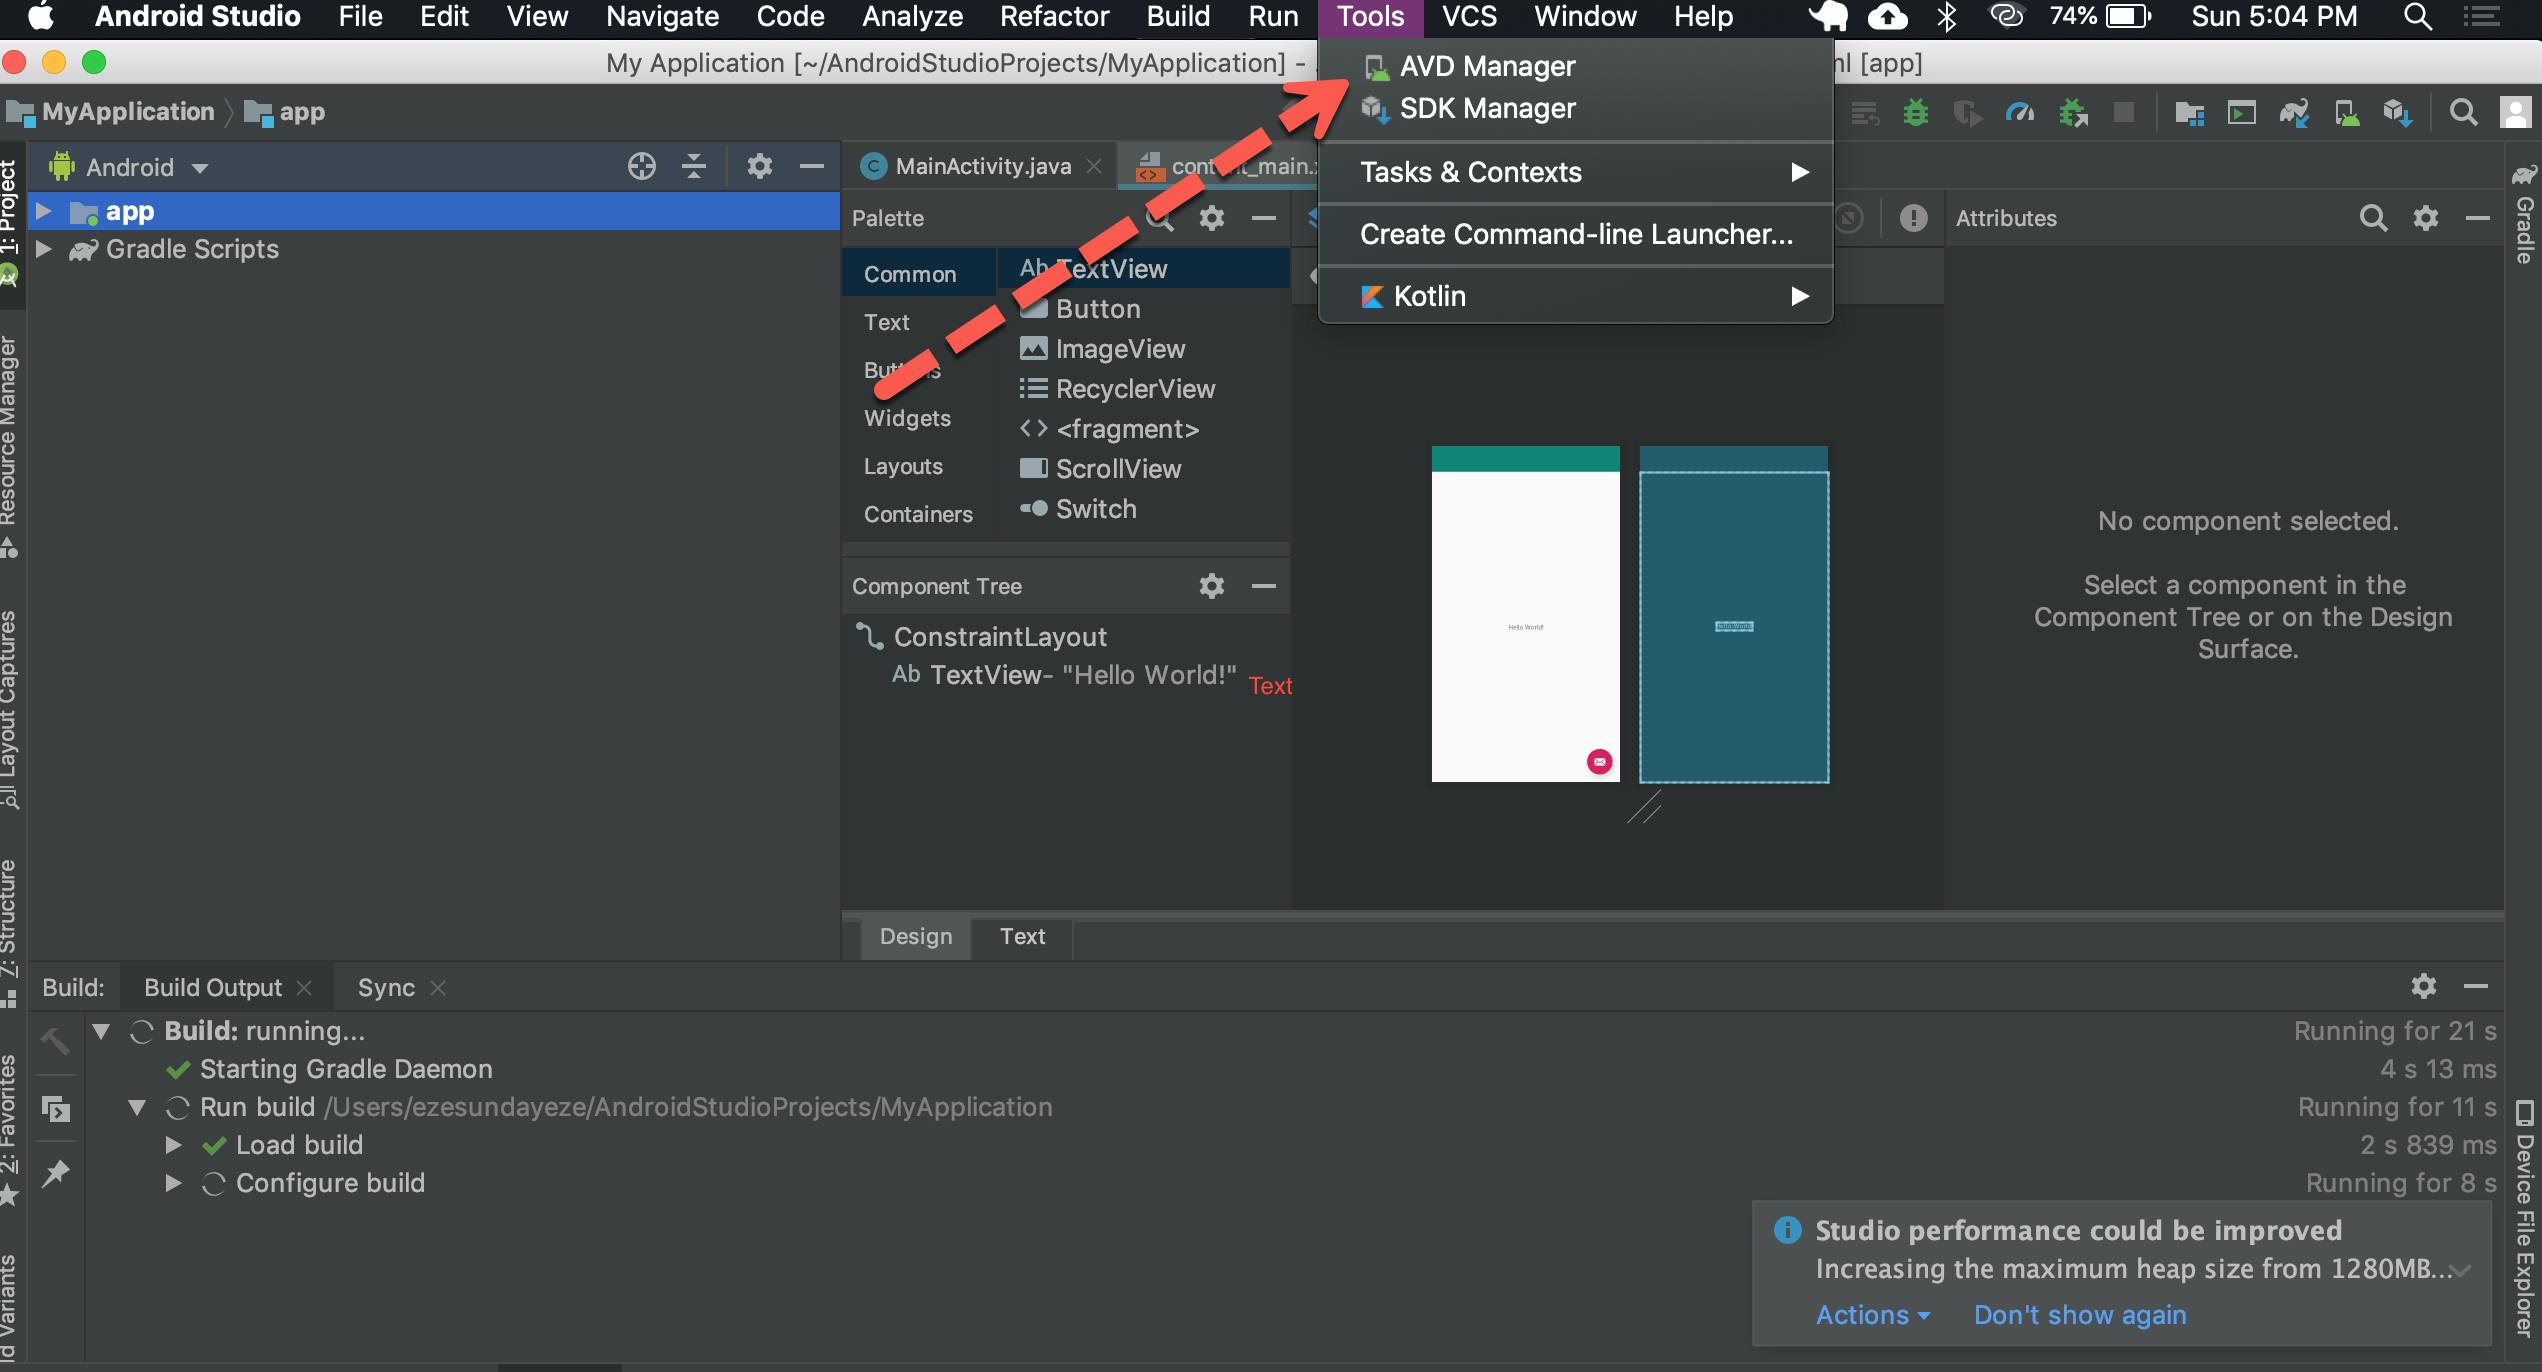 Screenshot of Android Studio with Tools Menu Open